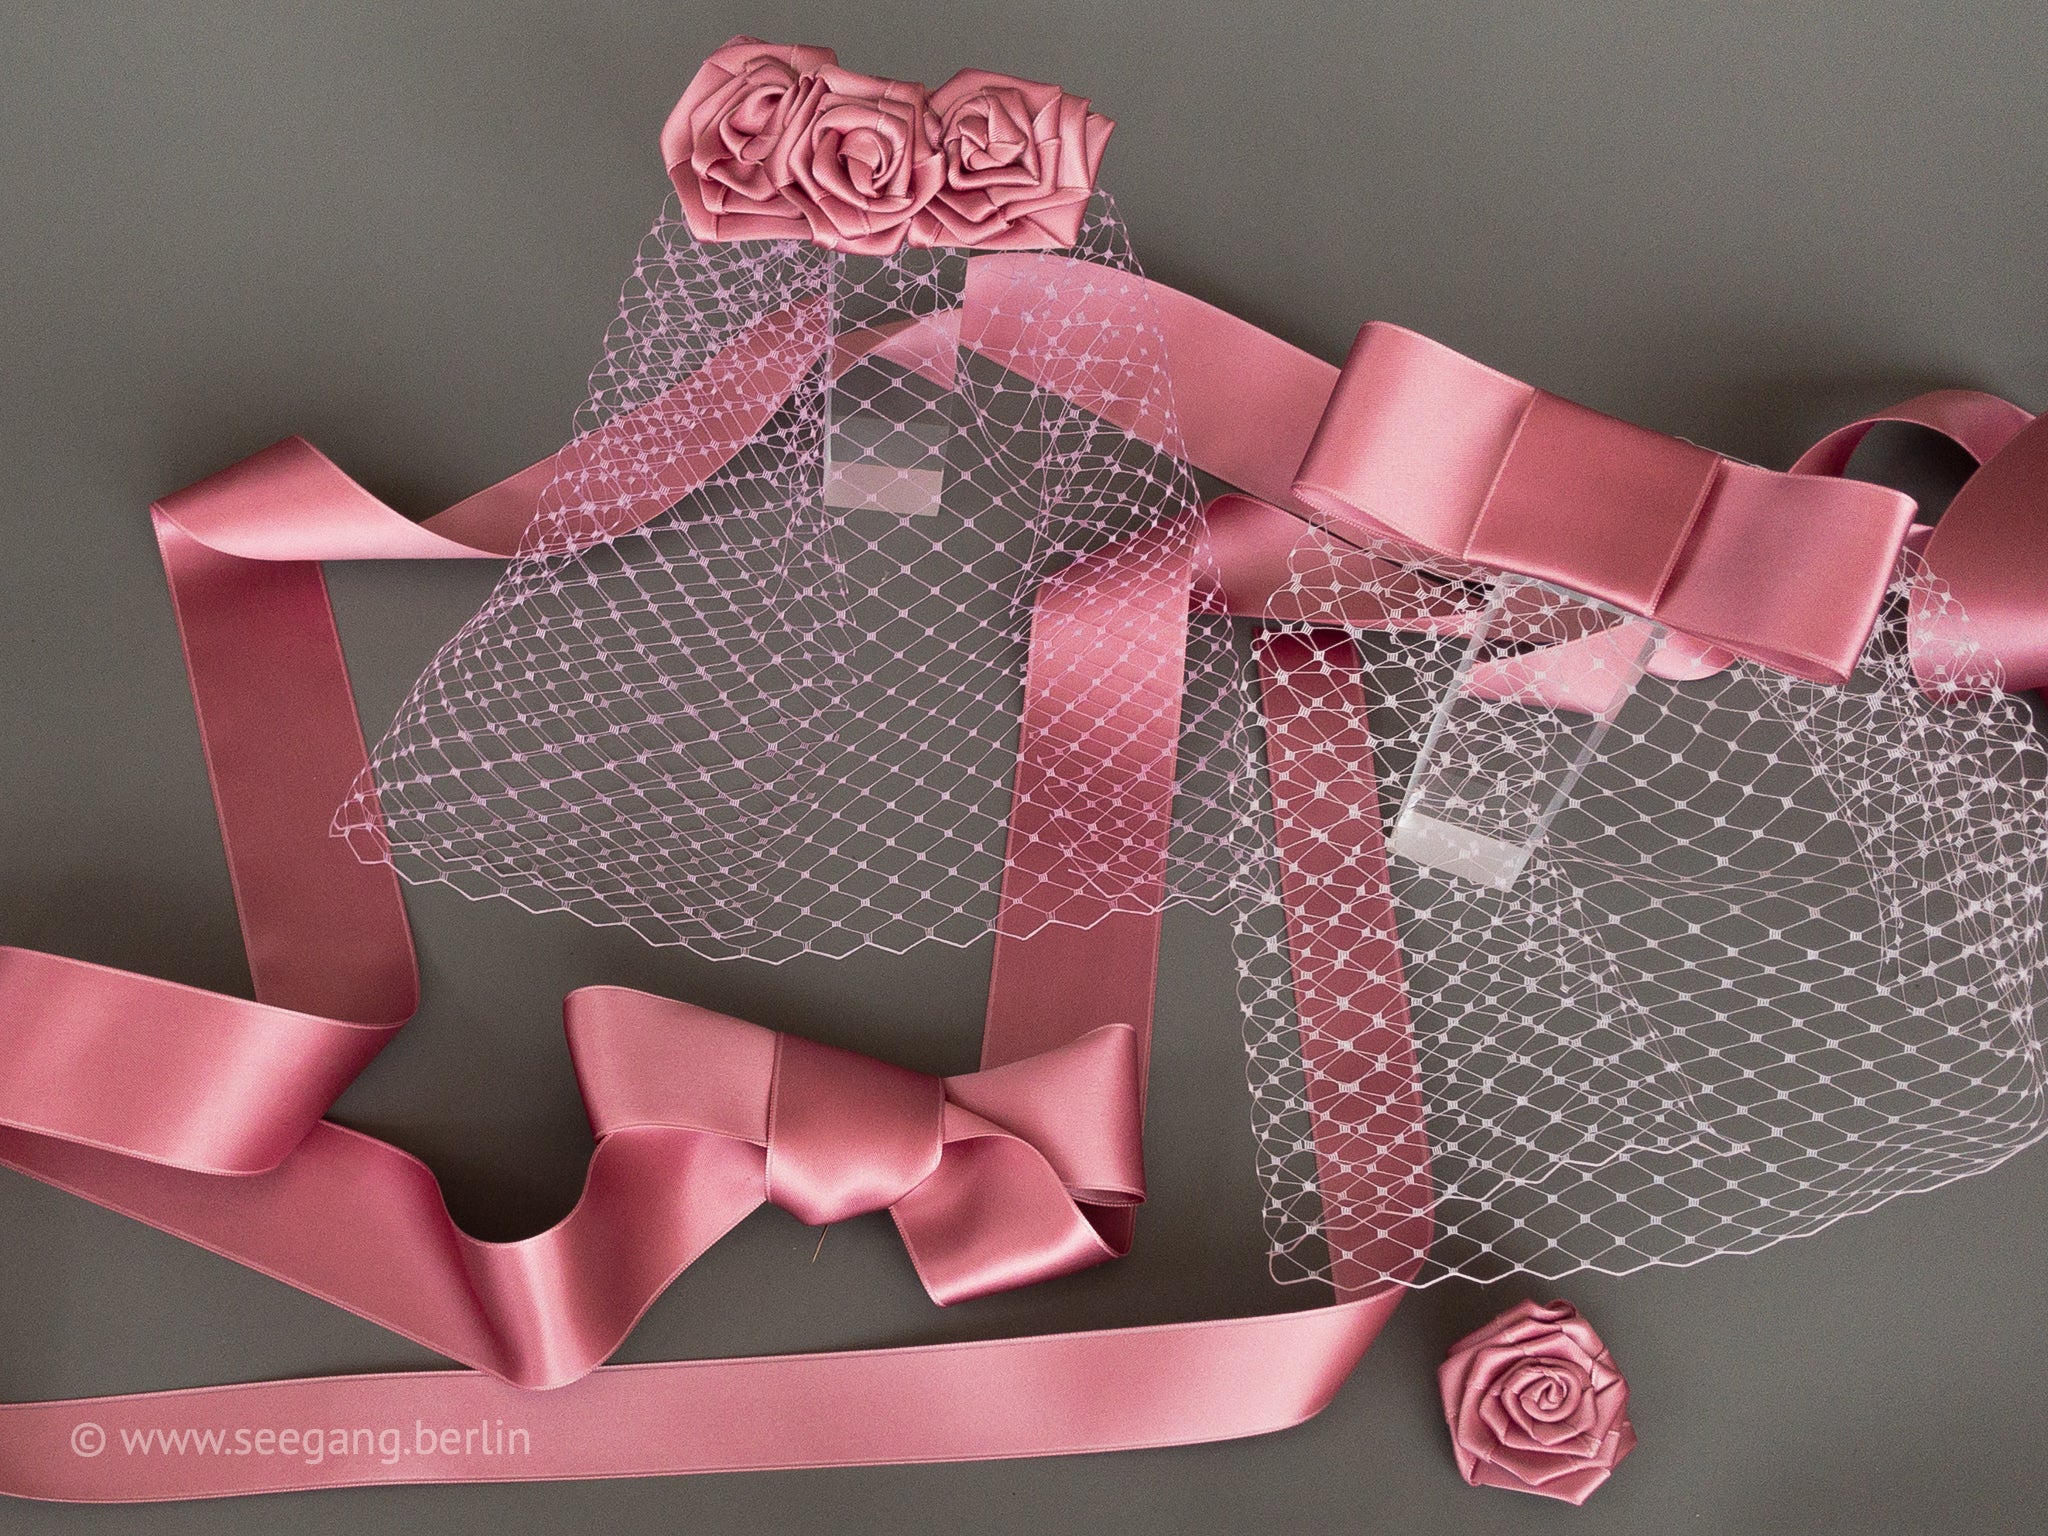 BIRDCAGE - VEIL HEADDRESS WITH ROSES IN SHADES OF PINK, DUSTY ROSE, BLUSH, OR ALMOND BLOSSOM